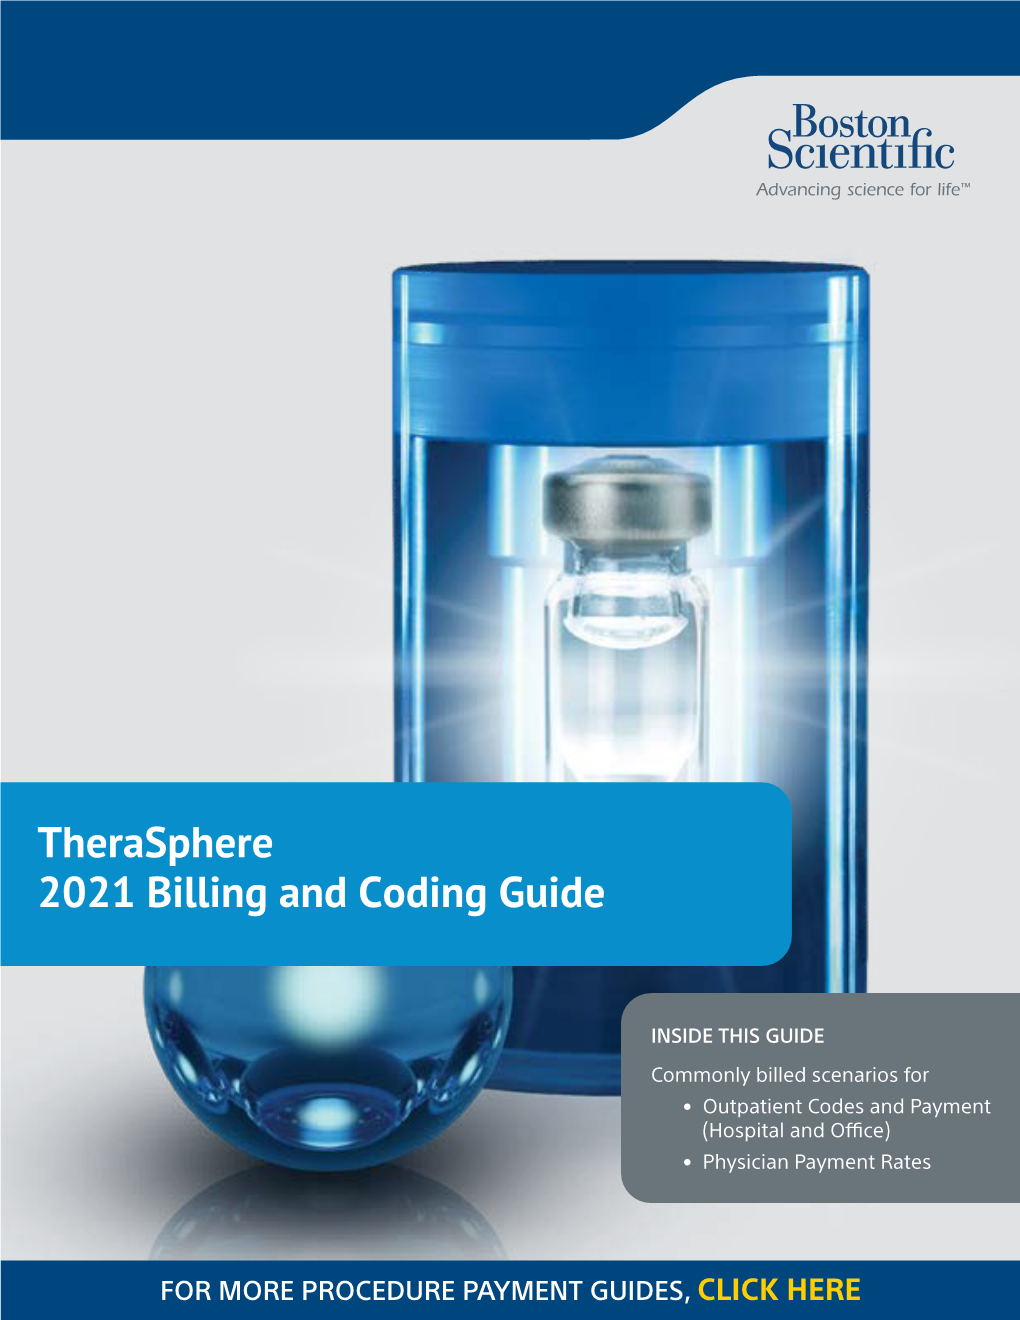 Therasphere 2021 Billing and Coding Guide